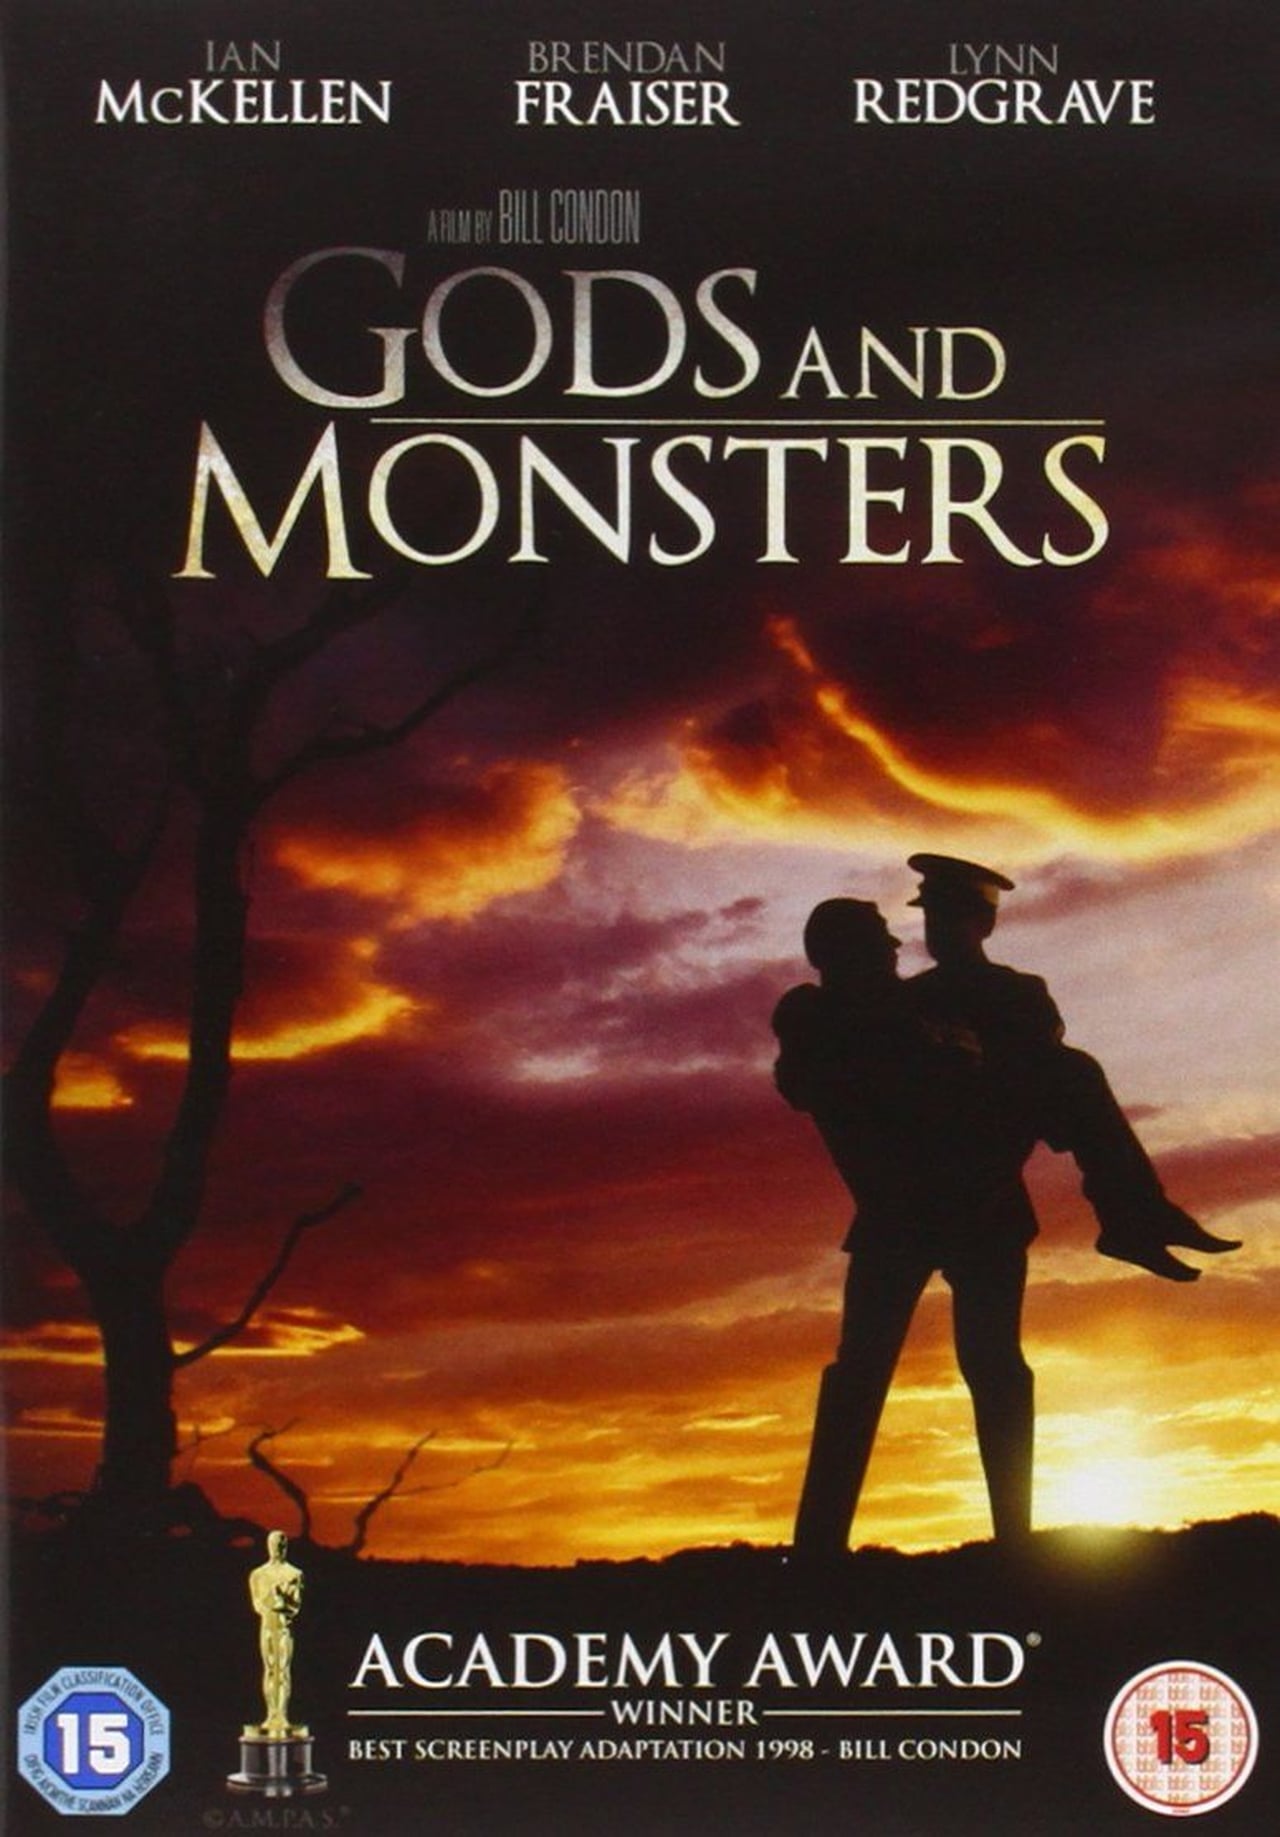 Gods and Monsters wiki, synopsis, reviews, watch and download